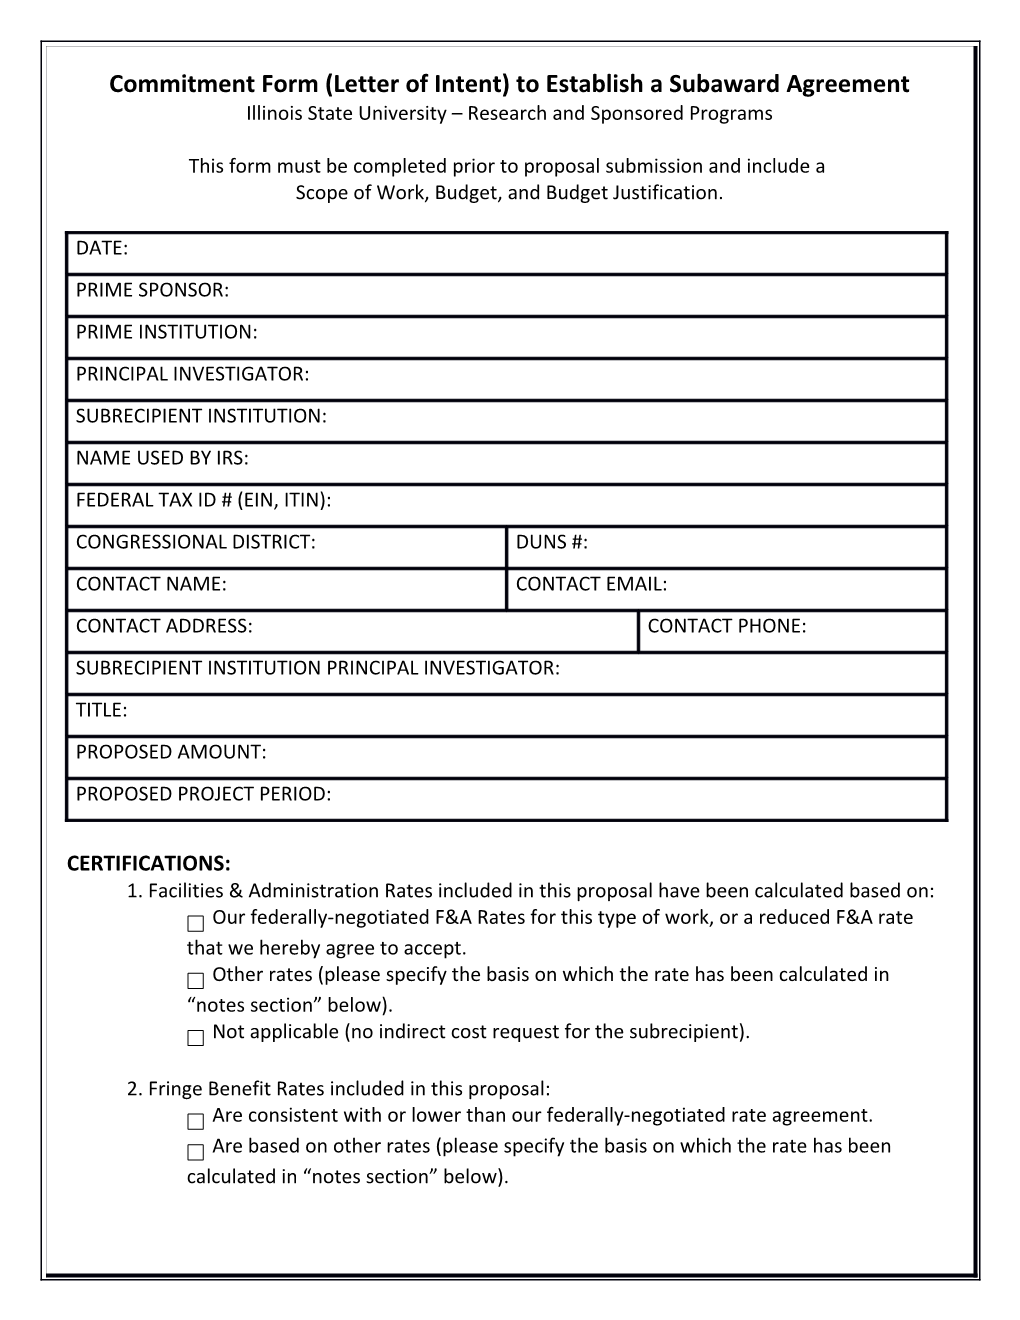 Commitment Form (Letter of Intent) to Establish a Subaward Agreement